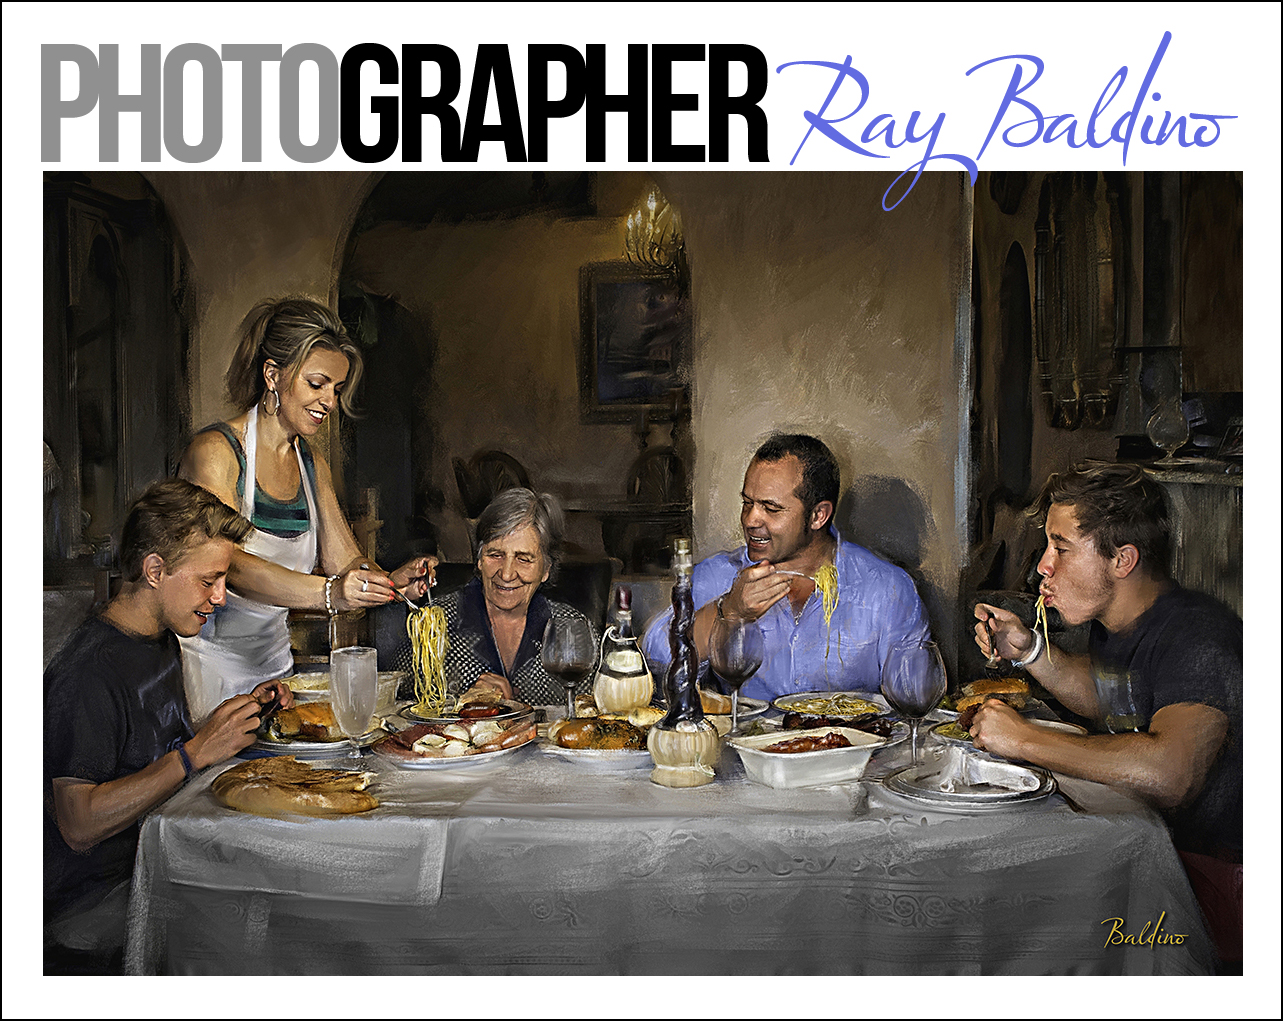 family-photography-in-m,elbourne-florida-by-ray-baldino-this-image-is-a-painted-portrait-of-a-family-and-their-two-children-and-grandmother-eating-a-traditional-italian-meal